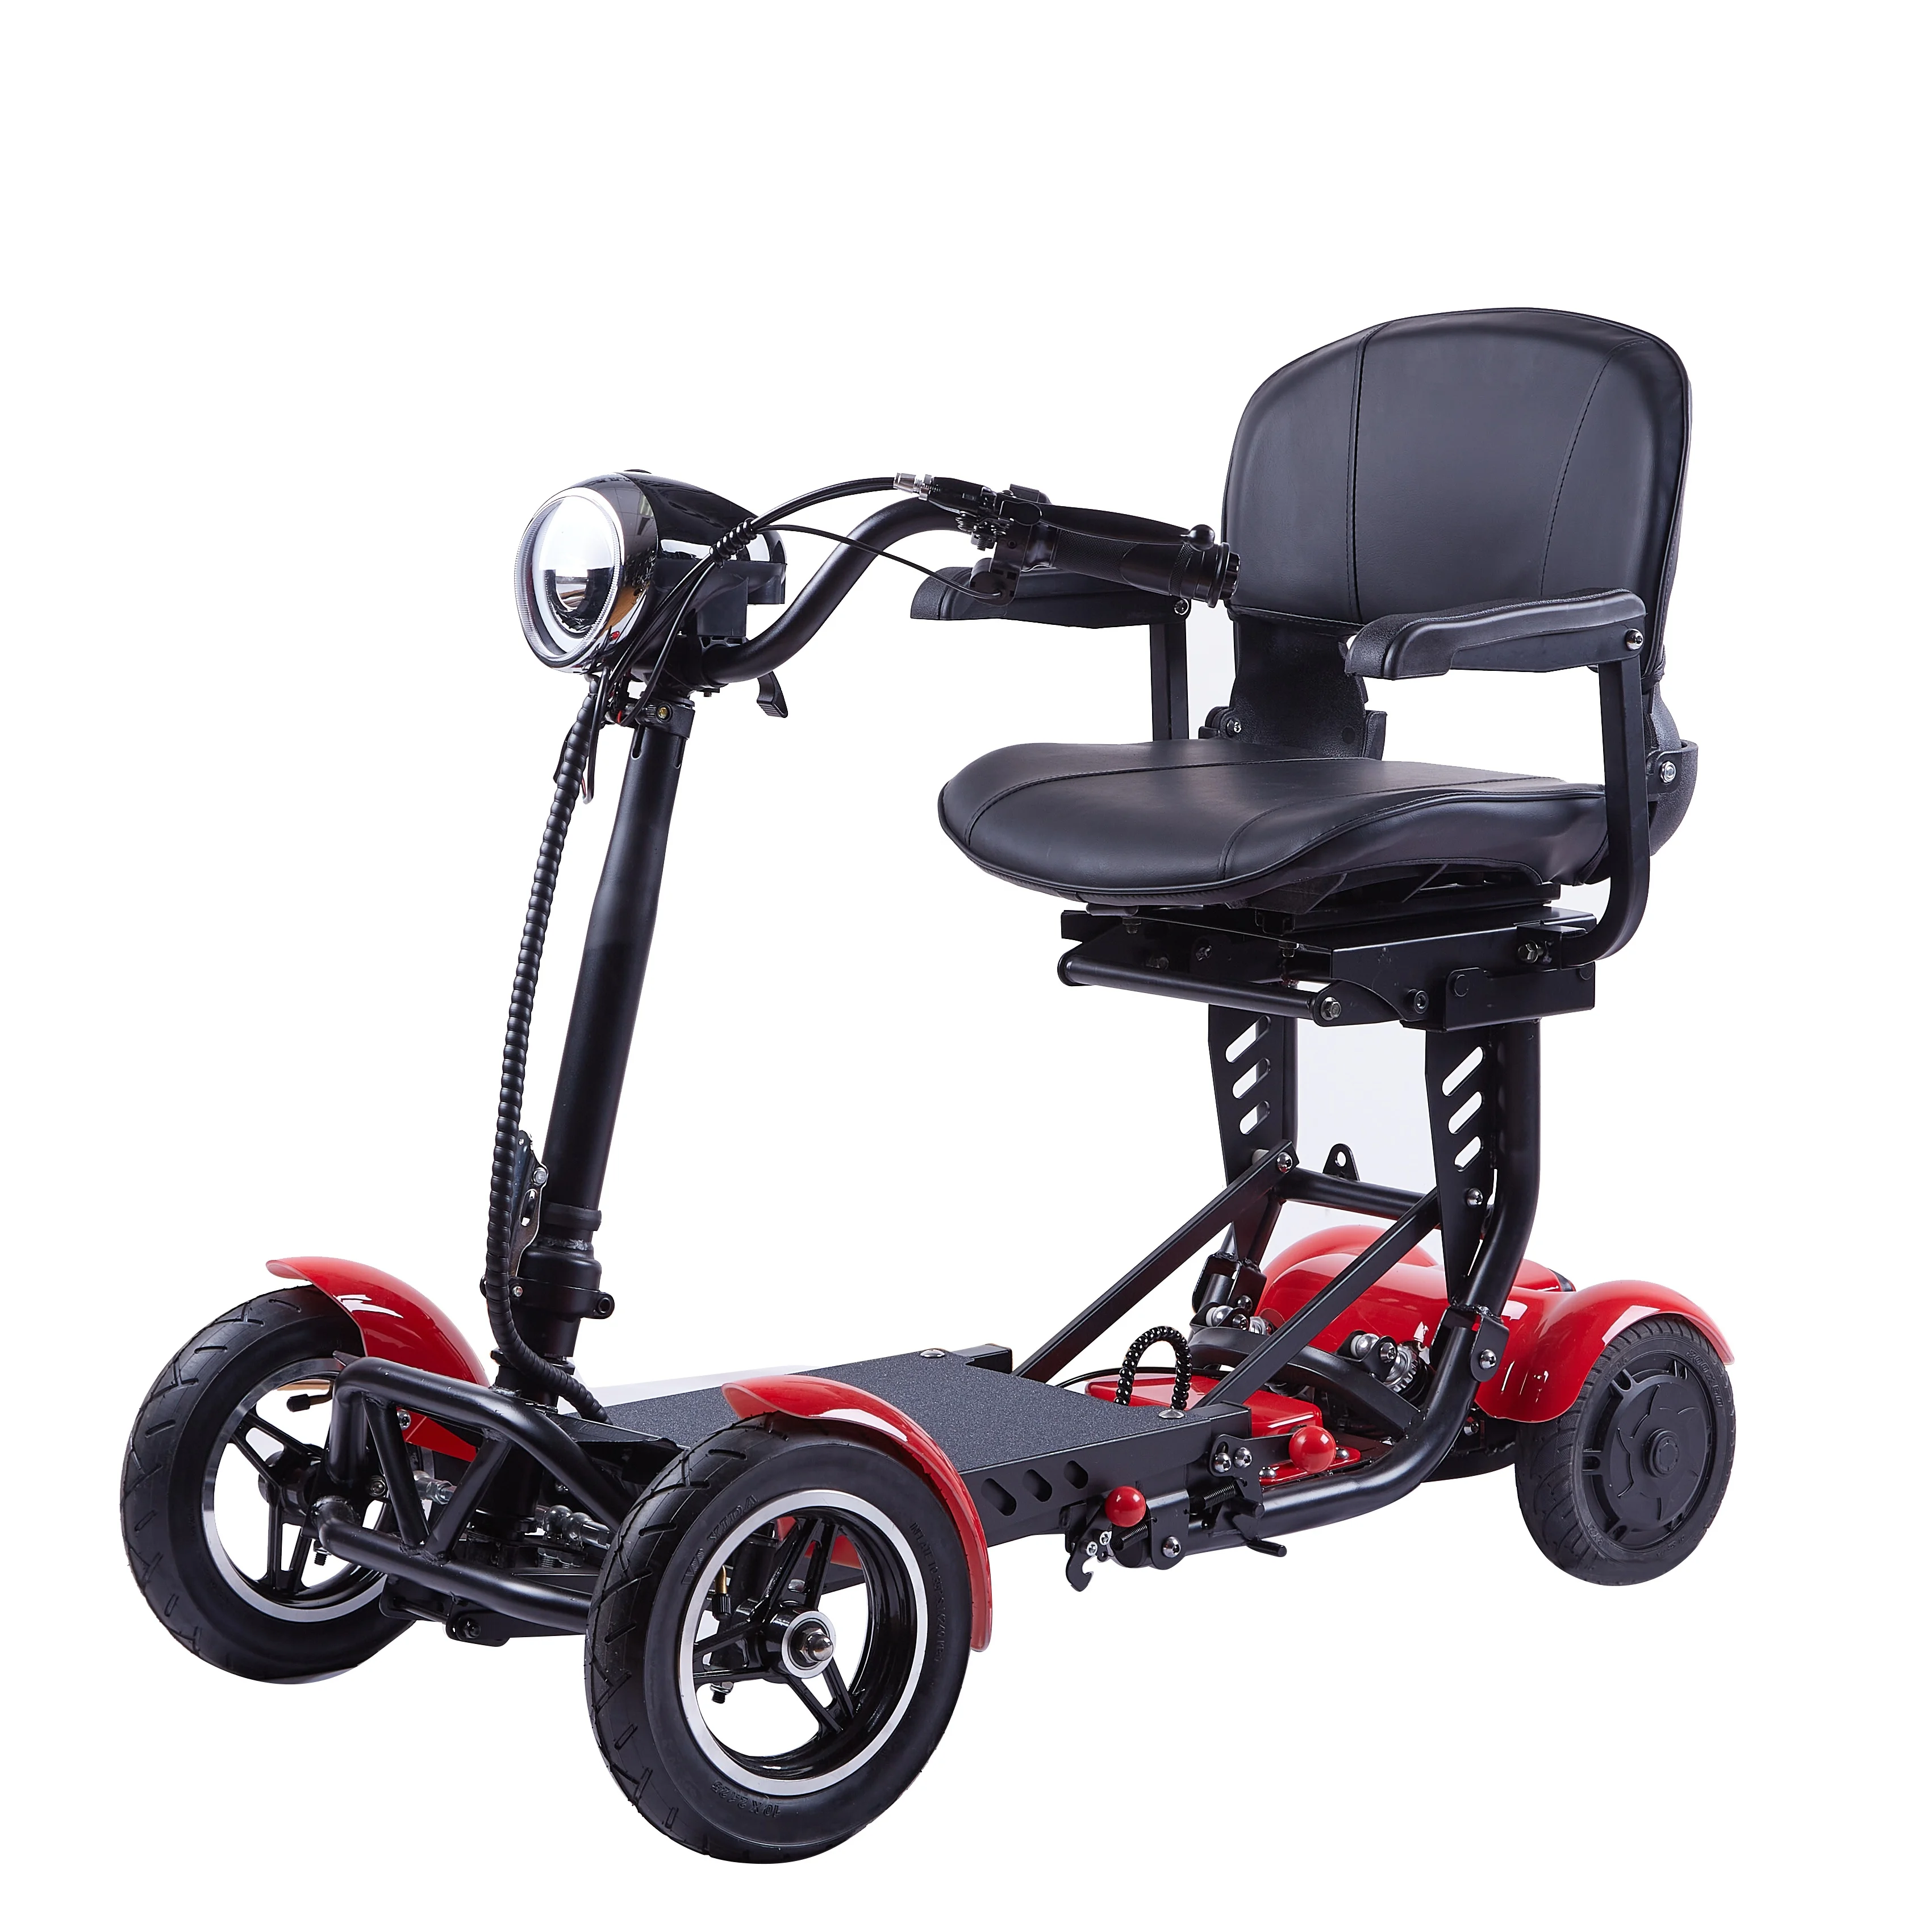 Electric Tricycle 4 Wheel Electric Scooter China Manufacturer Elderly Adult Folding Scooter 12 Inch Sine Wave Motor oem 4 wheel 2 person electric scooter adult folding 4 wheel scooter electric scooter elderly electric wheelchair